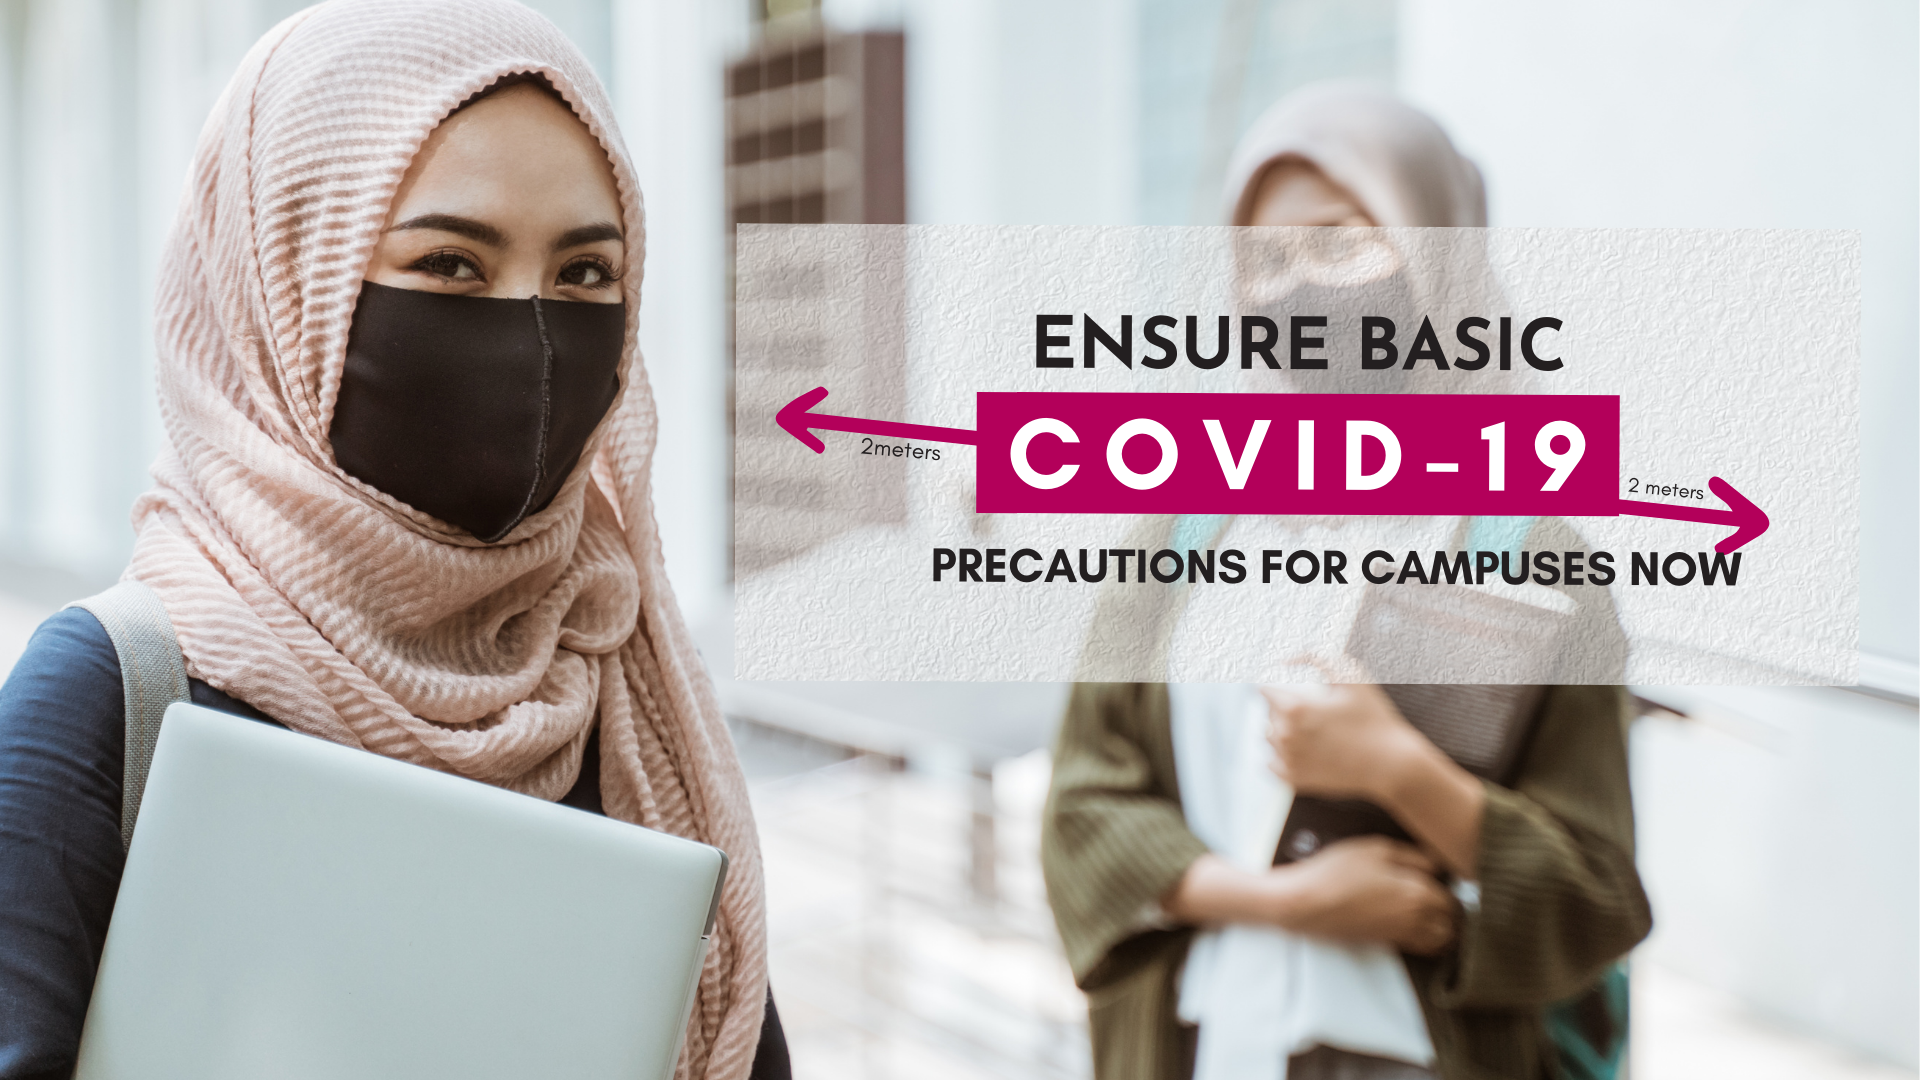 Ensure basic COVID-19 precautions for campuses now